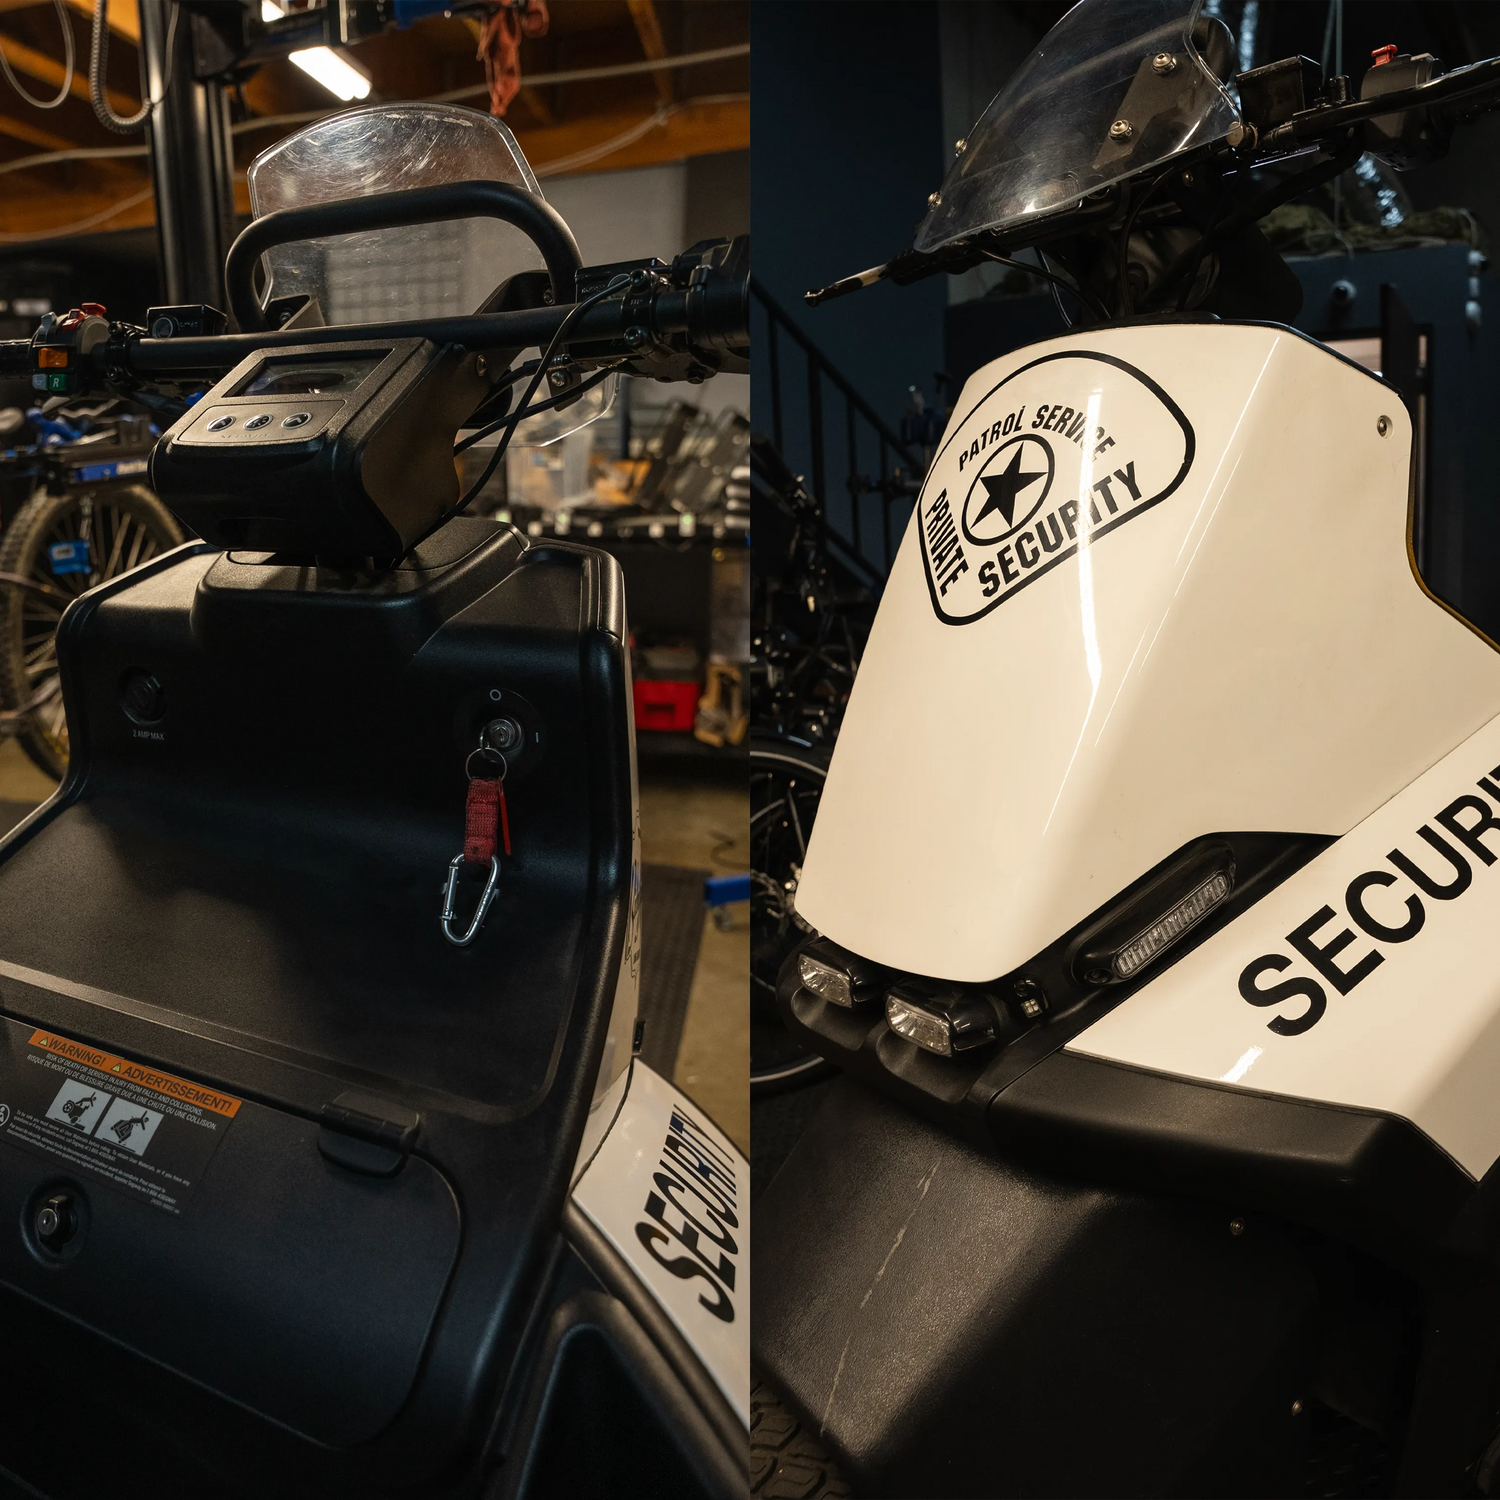 Different angles of a repaired Segway SE-3 Patroller